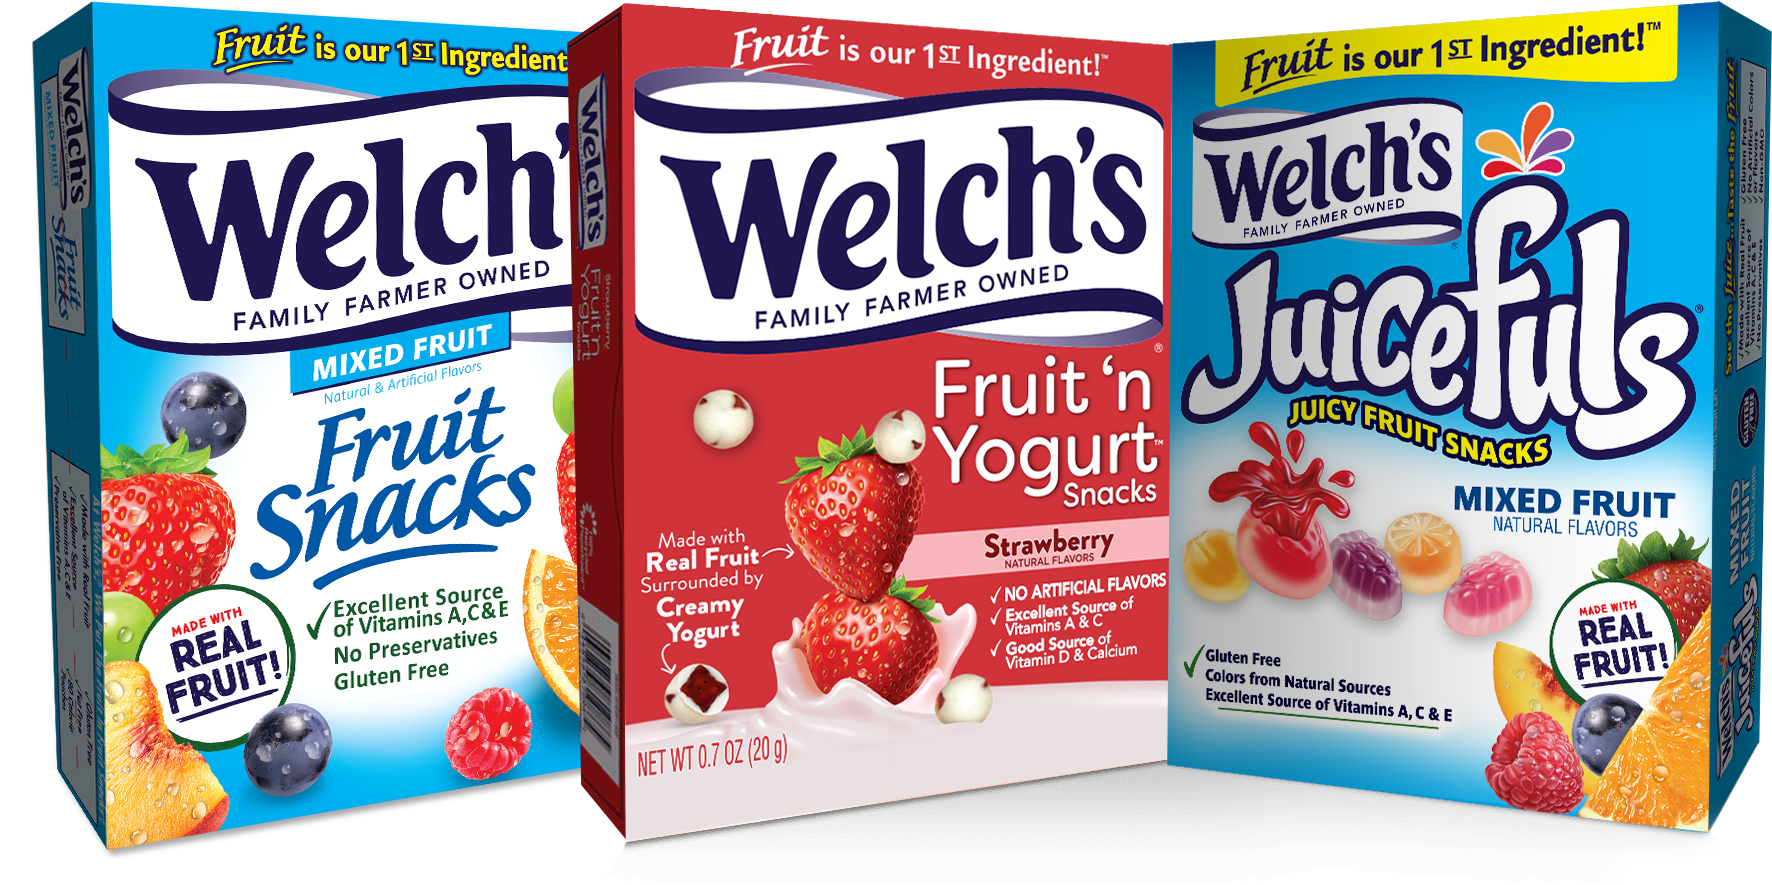 Welch’s® Fruit Snacks coupons